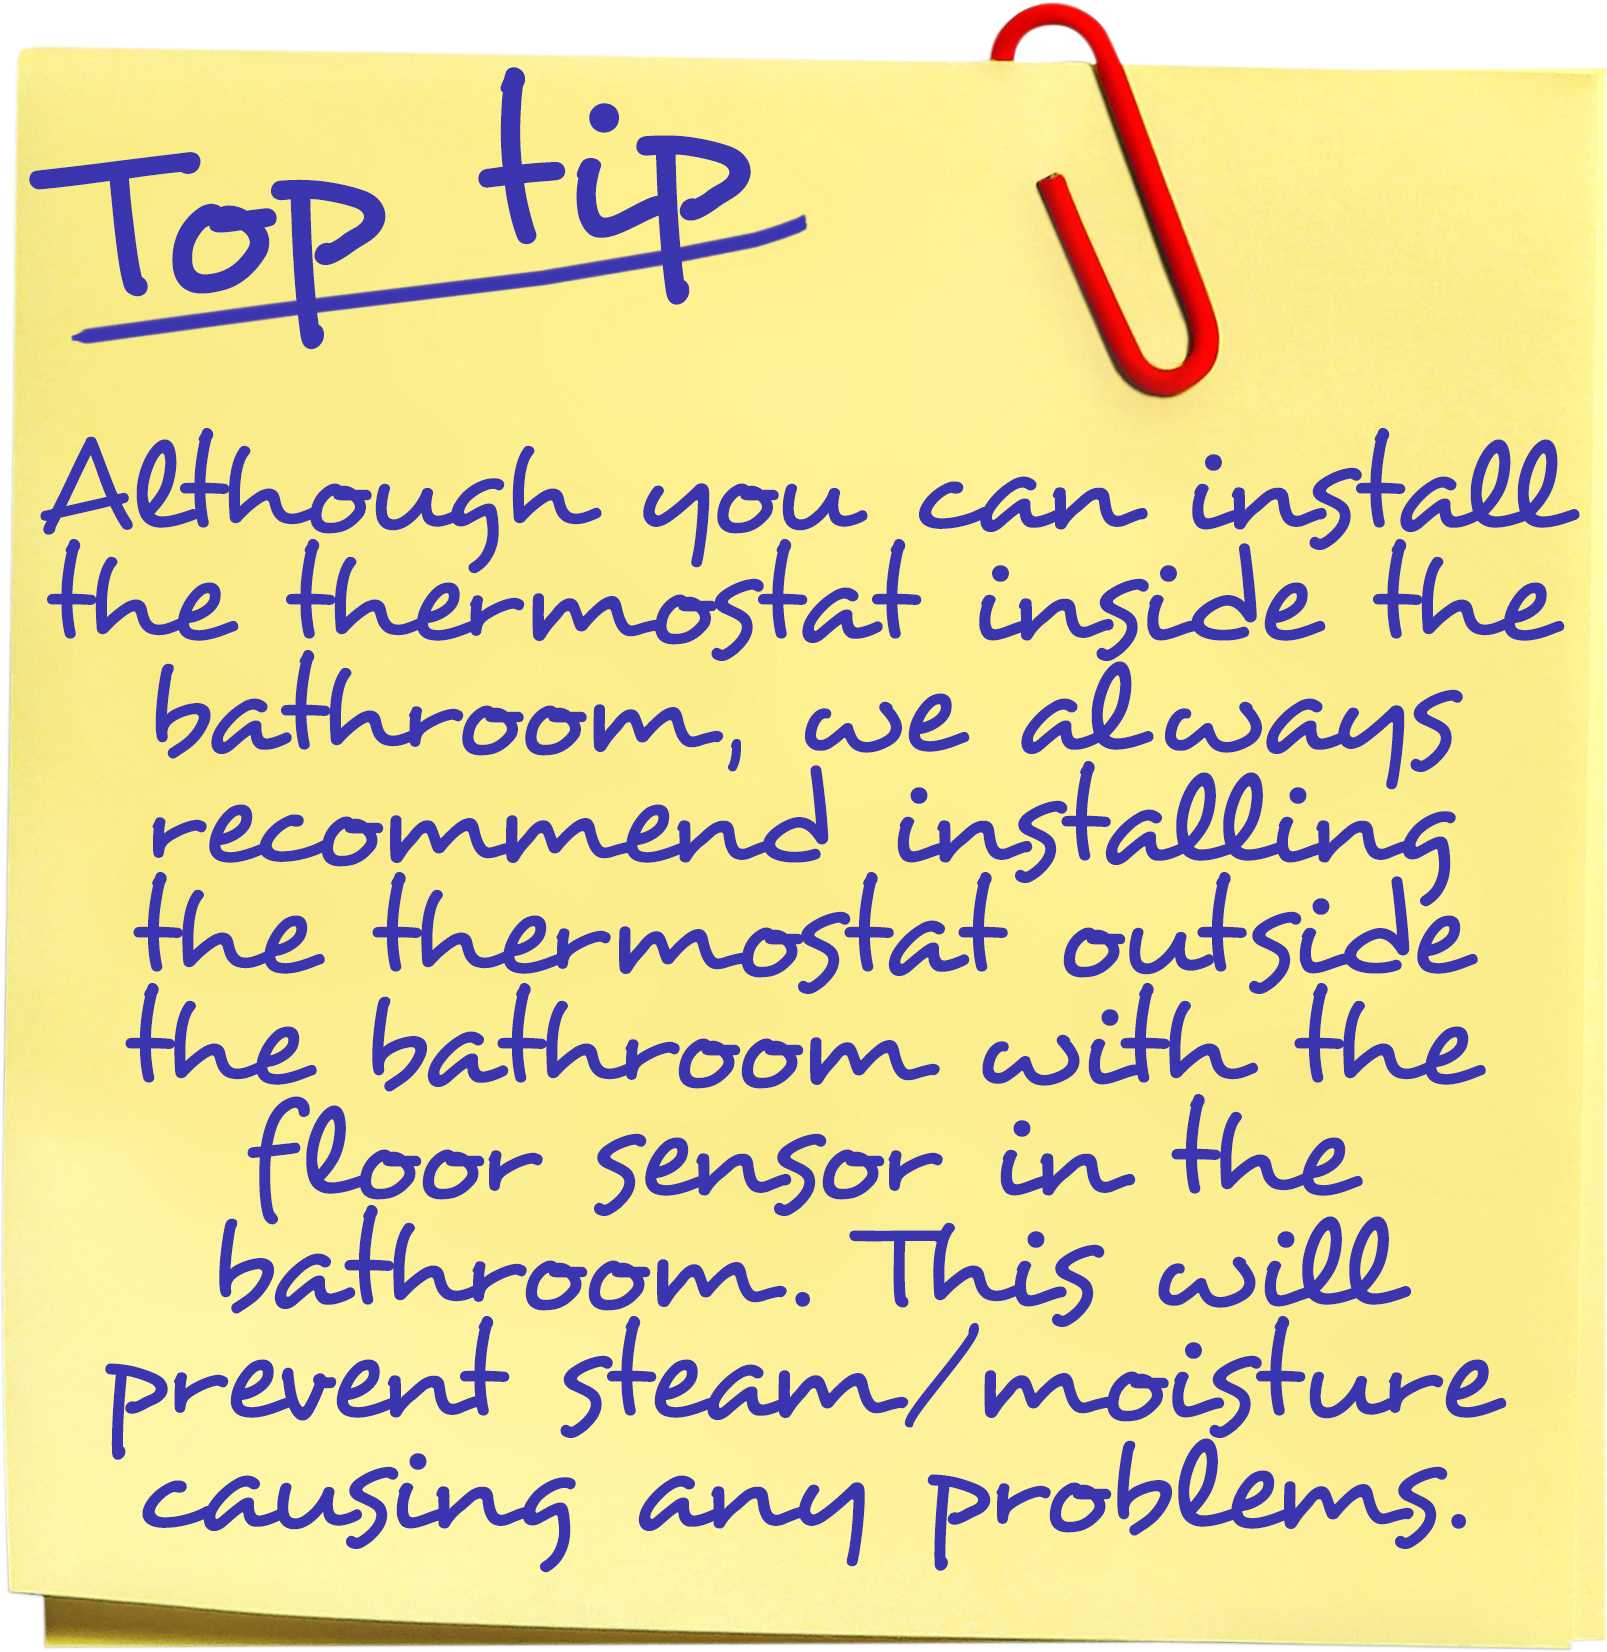 Although it is permissible to install the thermostat inside the bathroom under certain conditions, we always recommend that the thermostat is installed outside the bathroom with the floor sensor in the bathroom. This will prevent steam / moisture causing any problems with the thermostat and ensure that it works efficiently.